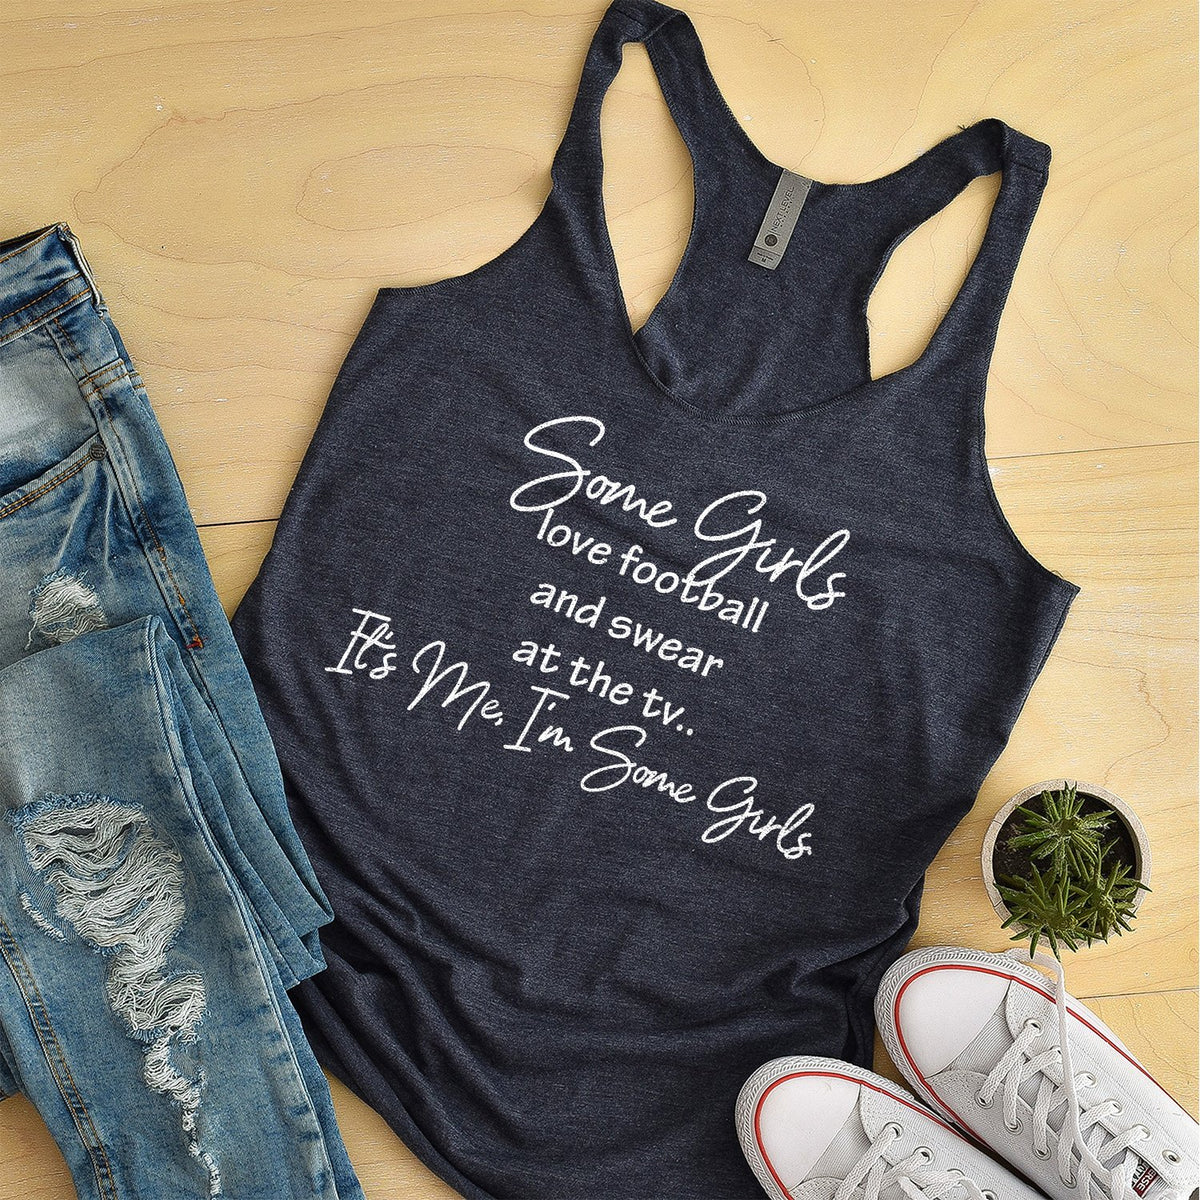 Some Girls Love Football and Swear at the TV - Tank Top Racerback